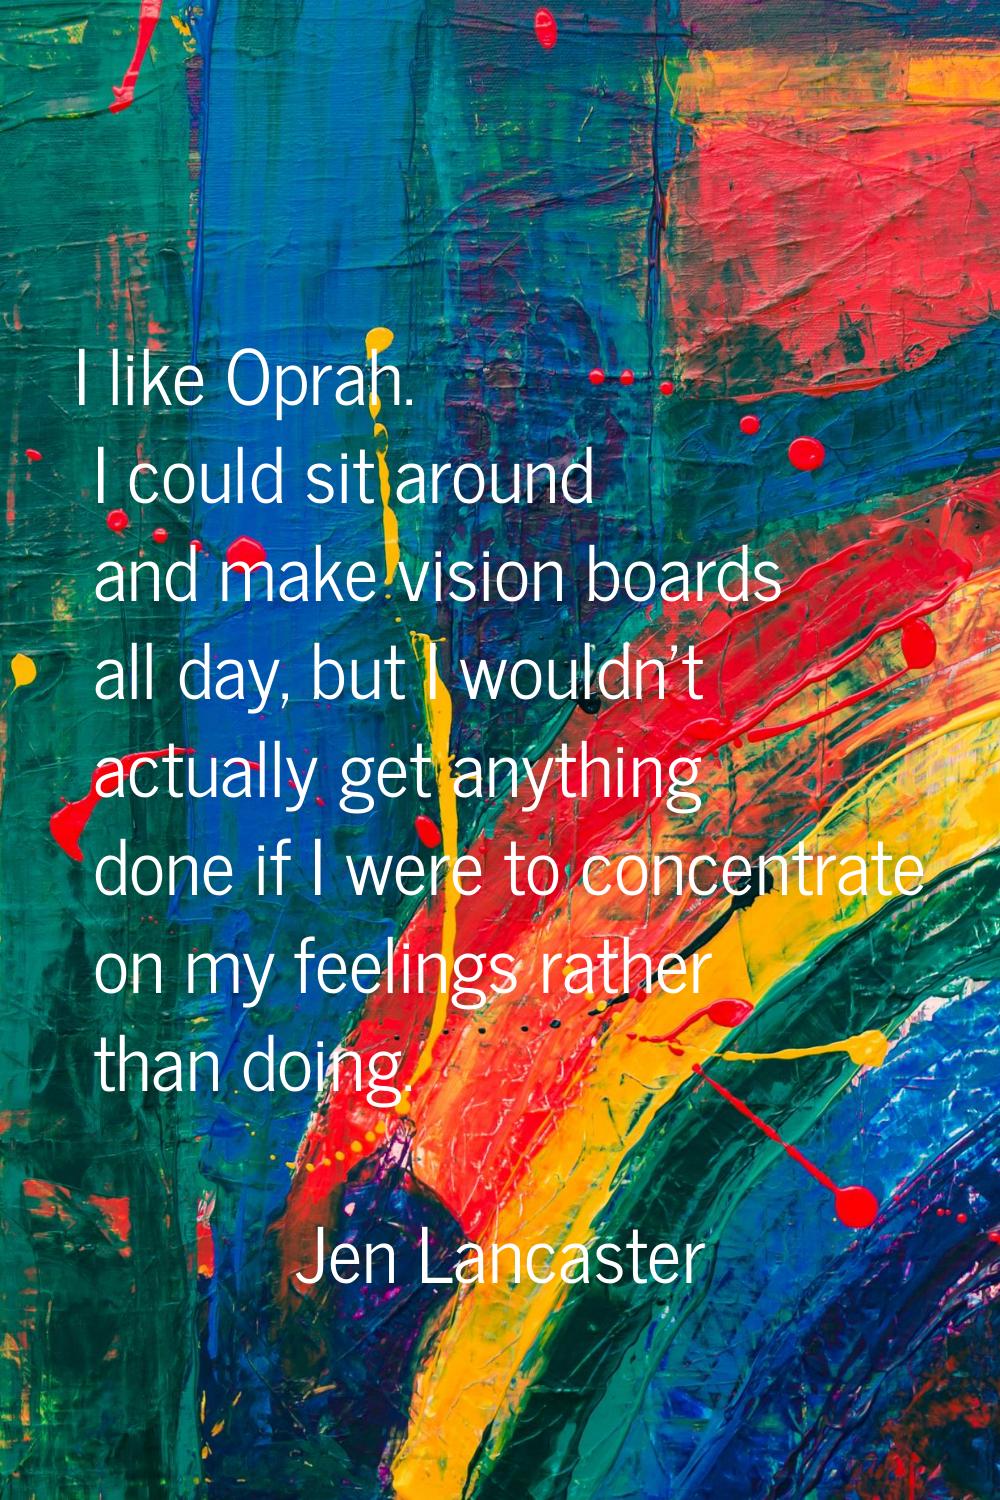 I like Oprah. I could sit around and make vision boards all day, but I wouldn't actually get anythi